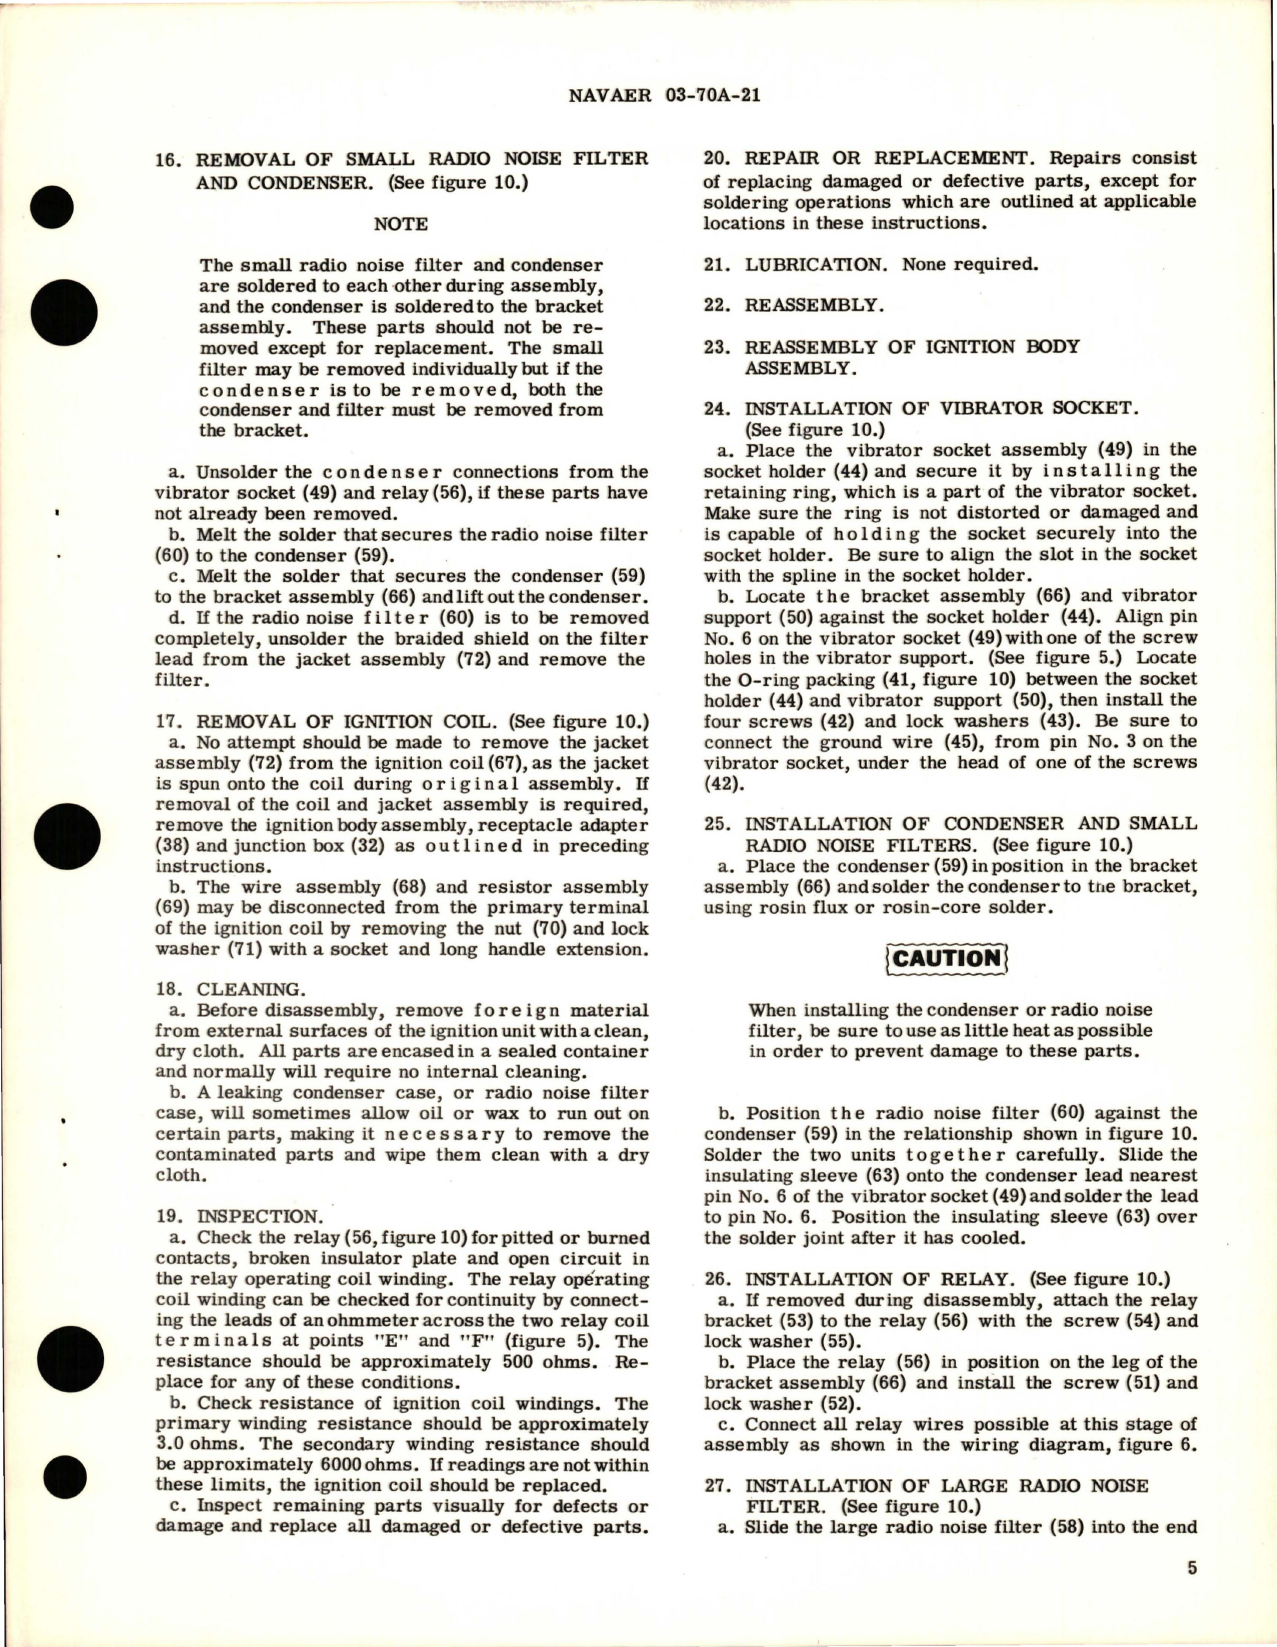 Sample page 5 from AirCorps Library document: Overhaul Instructions with Parts Breakdown for Ignition Unit - Part B11C30 